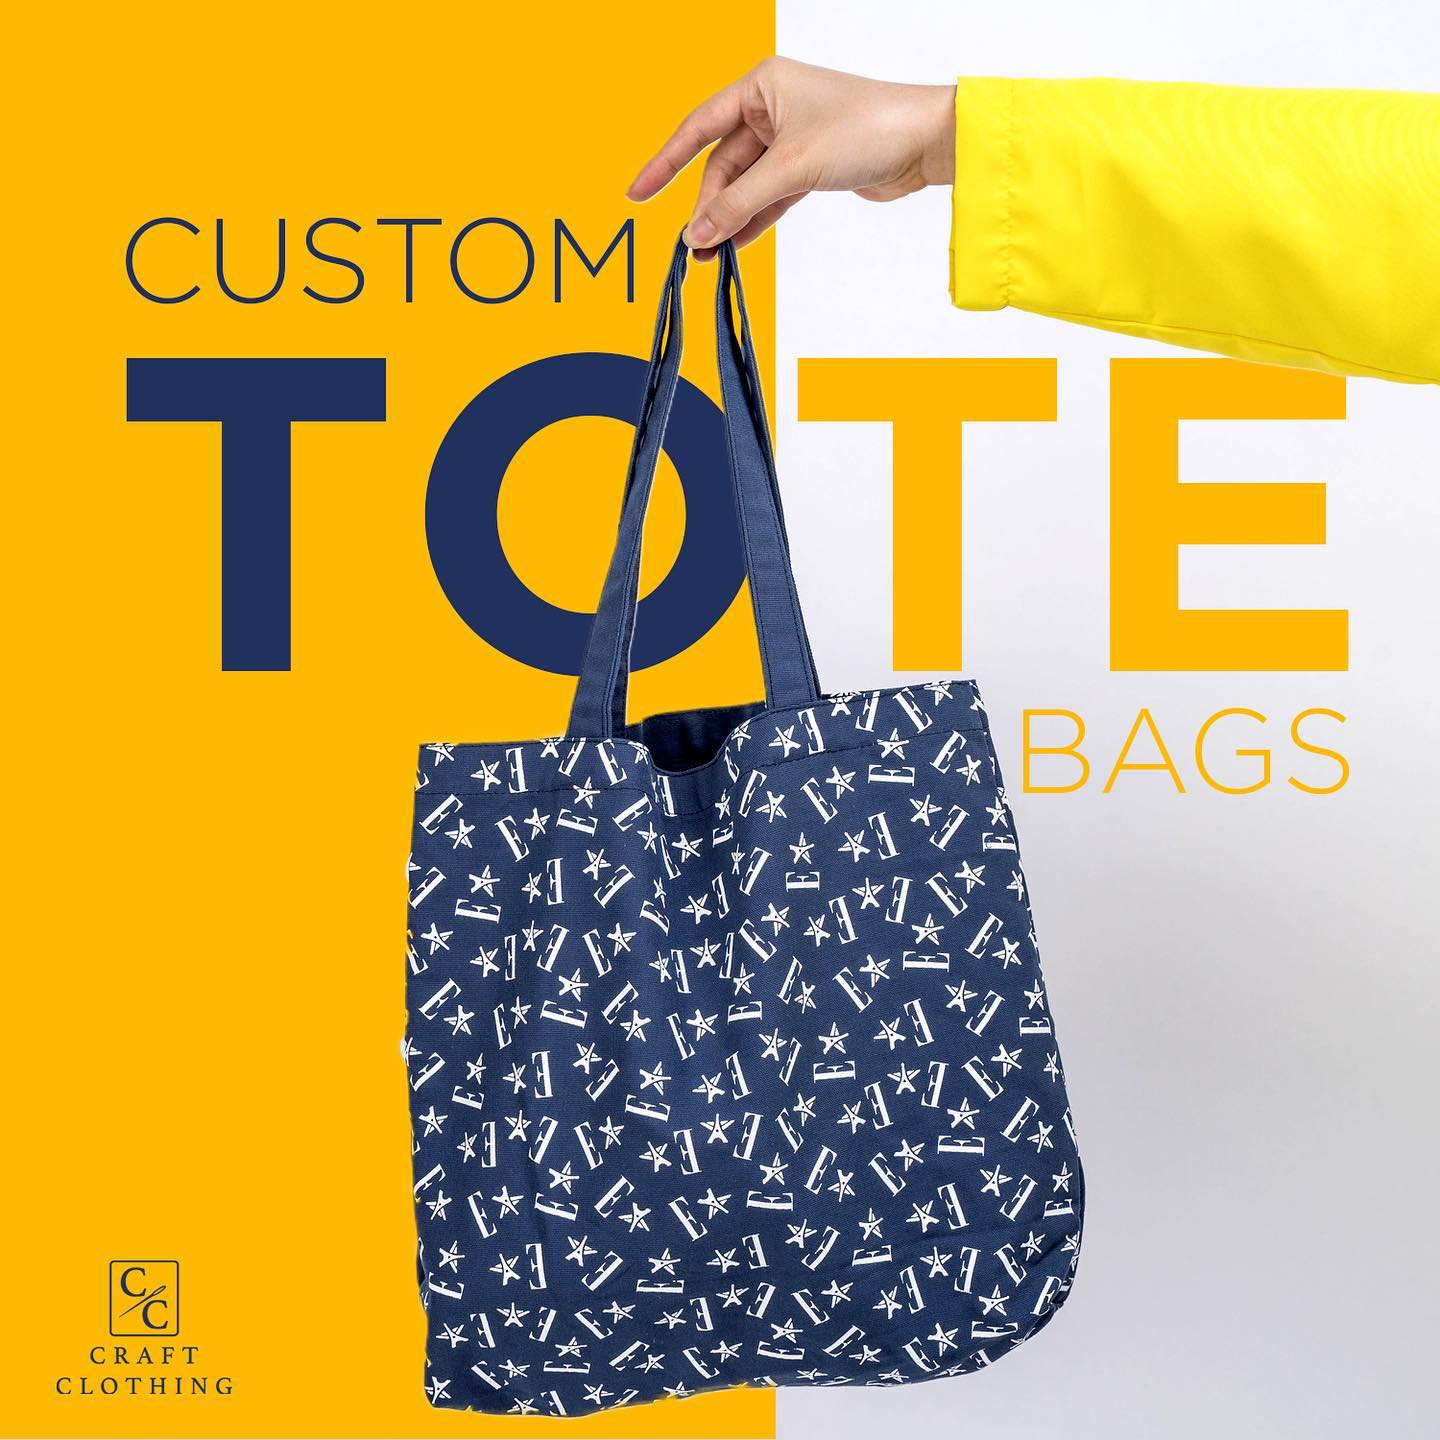 Custom Tote Bags: The perfect grab n' go bag for your active lifestyle –  Craft Clothing